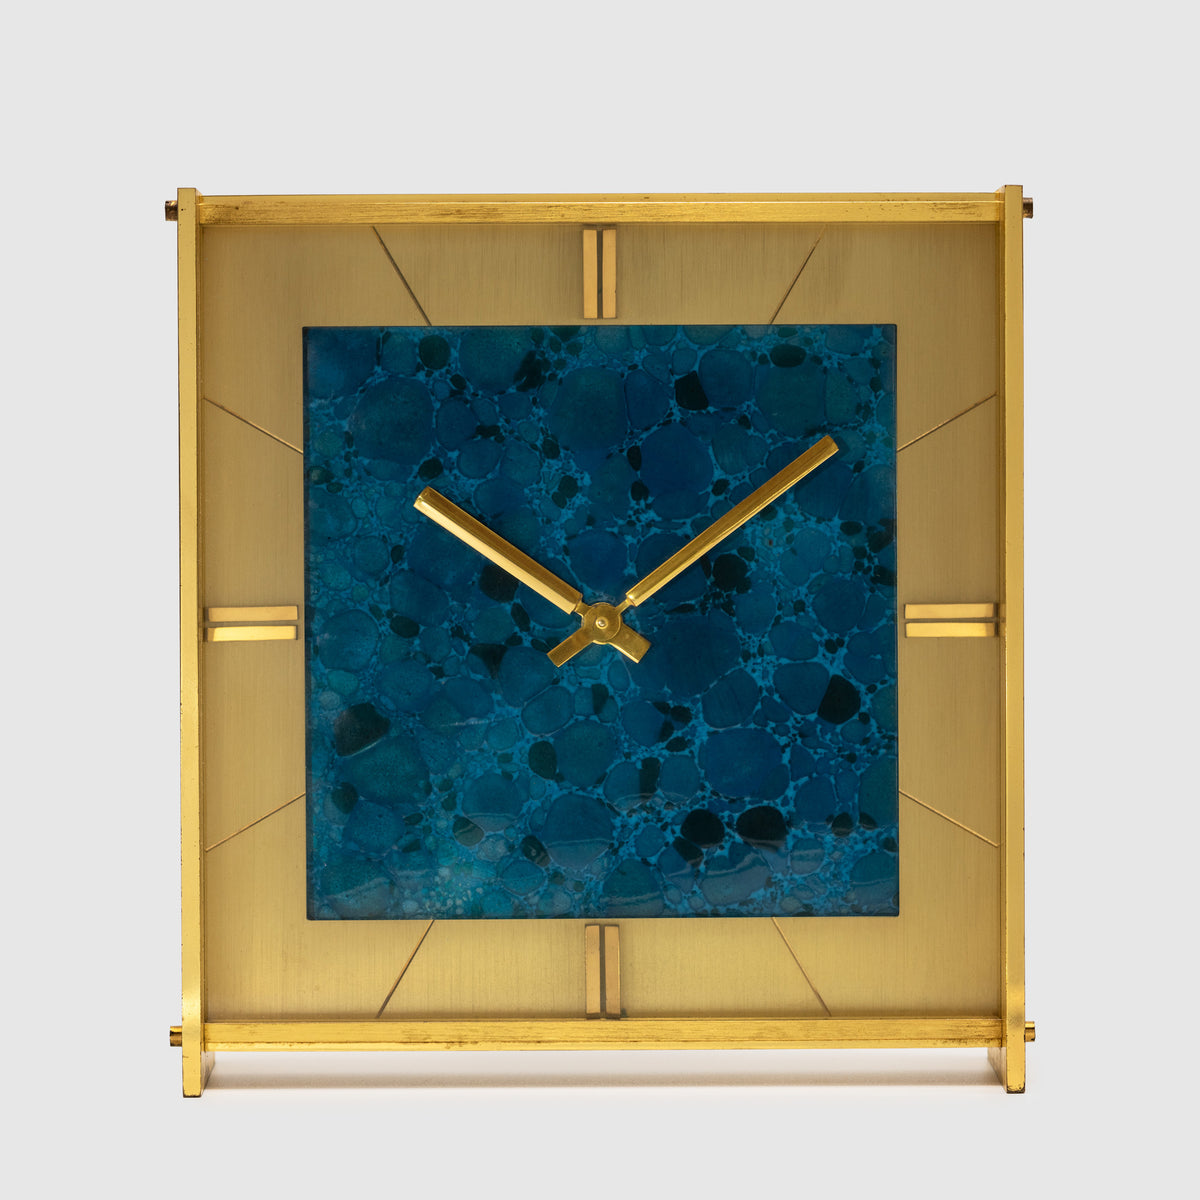 1960's LeCoultre Co. Table Clock with Enamel MultiColored Turquoise Dial Ref. 442